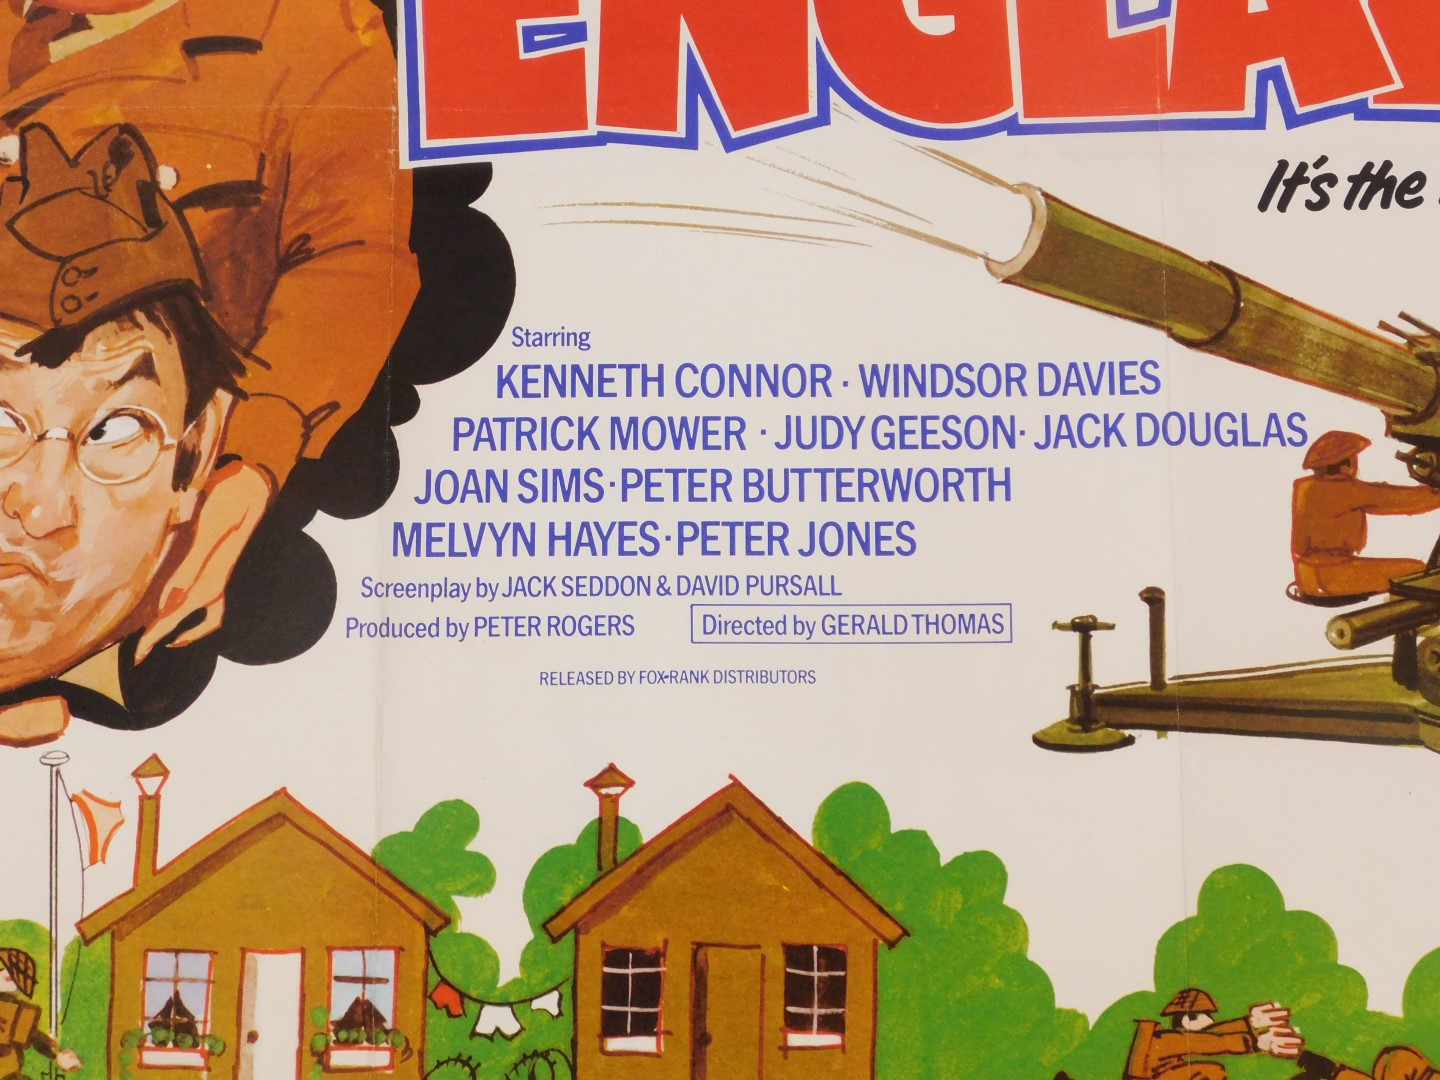 A 1970s film poster Carry on England, 75cm x 102cm. Mike Bell was a prolific artist of film posters - Image 2 of 3